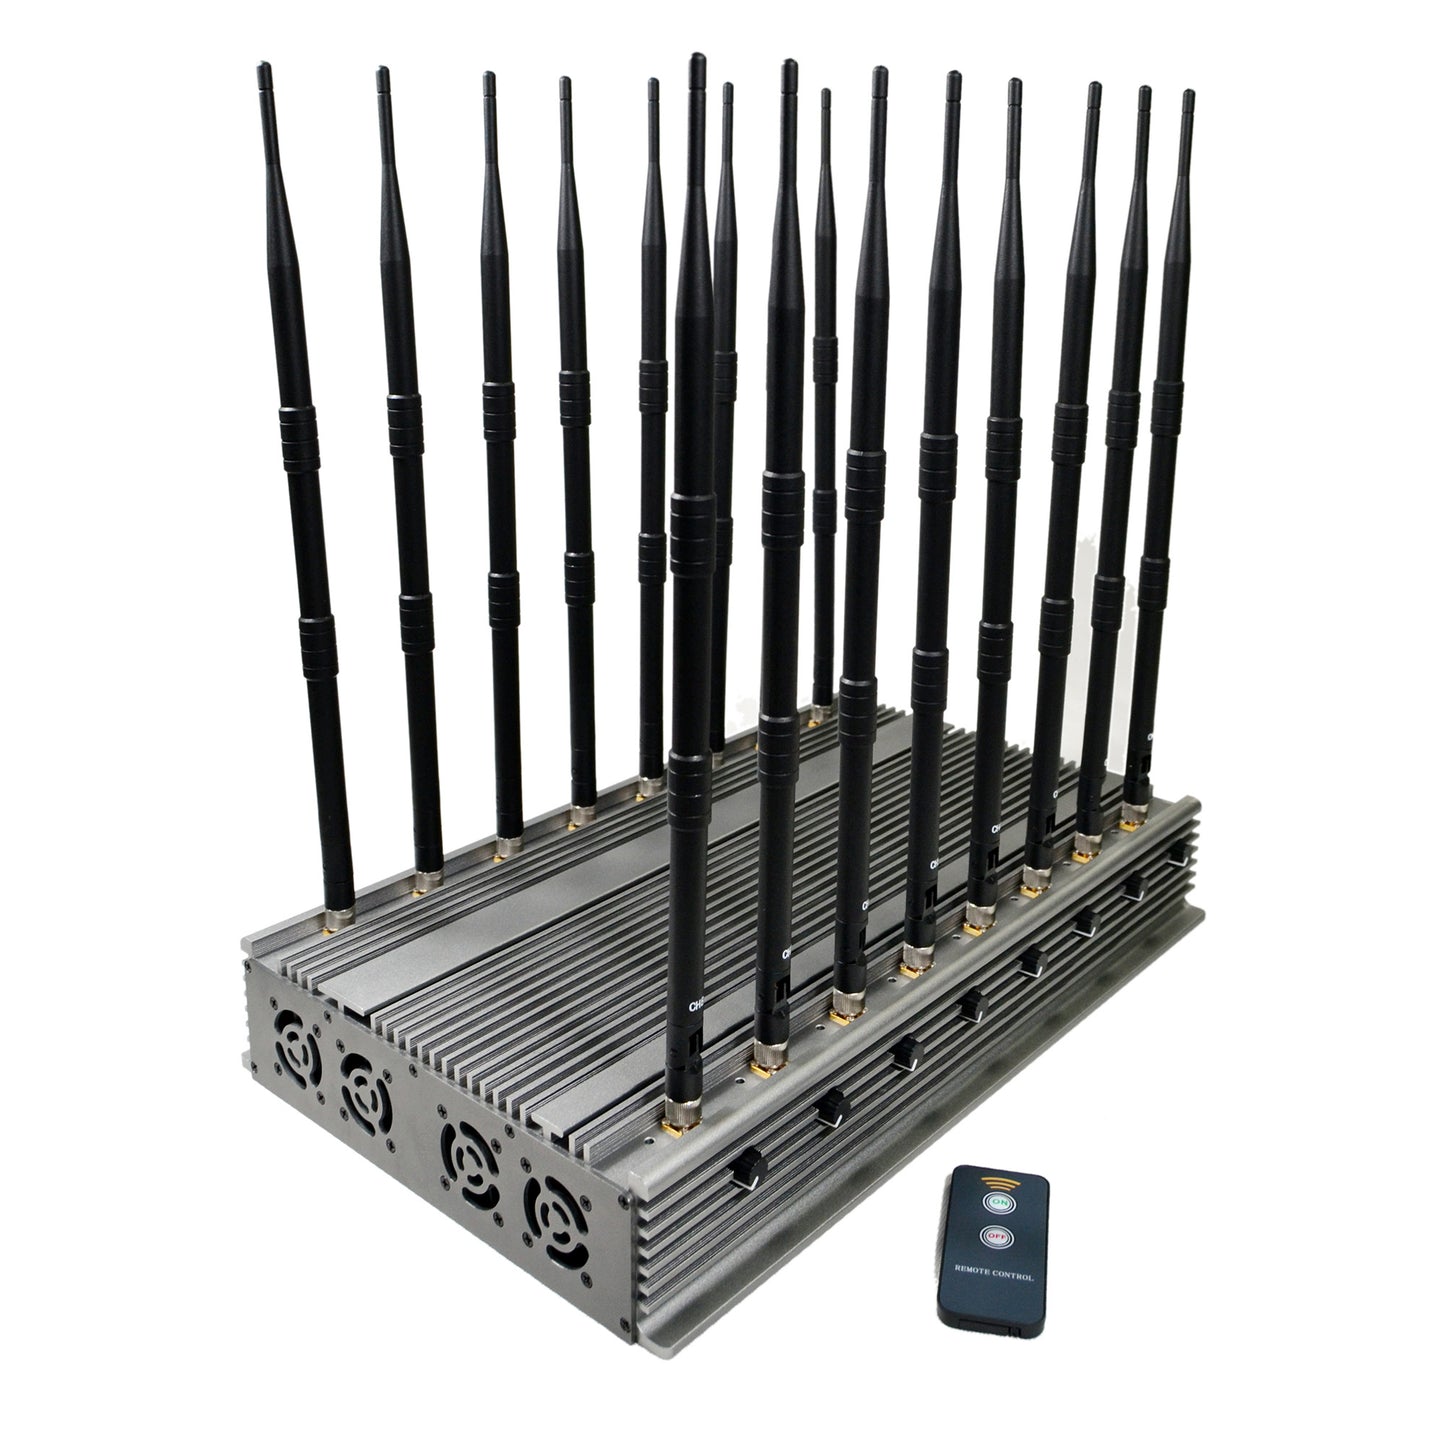 World first all-in-one powerful cell phone 5G GPS UHF VHF WIFI jammer